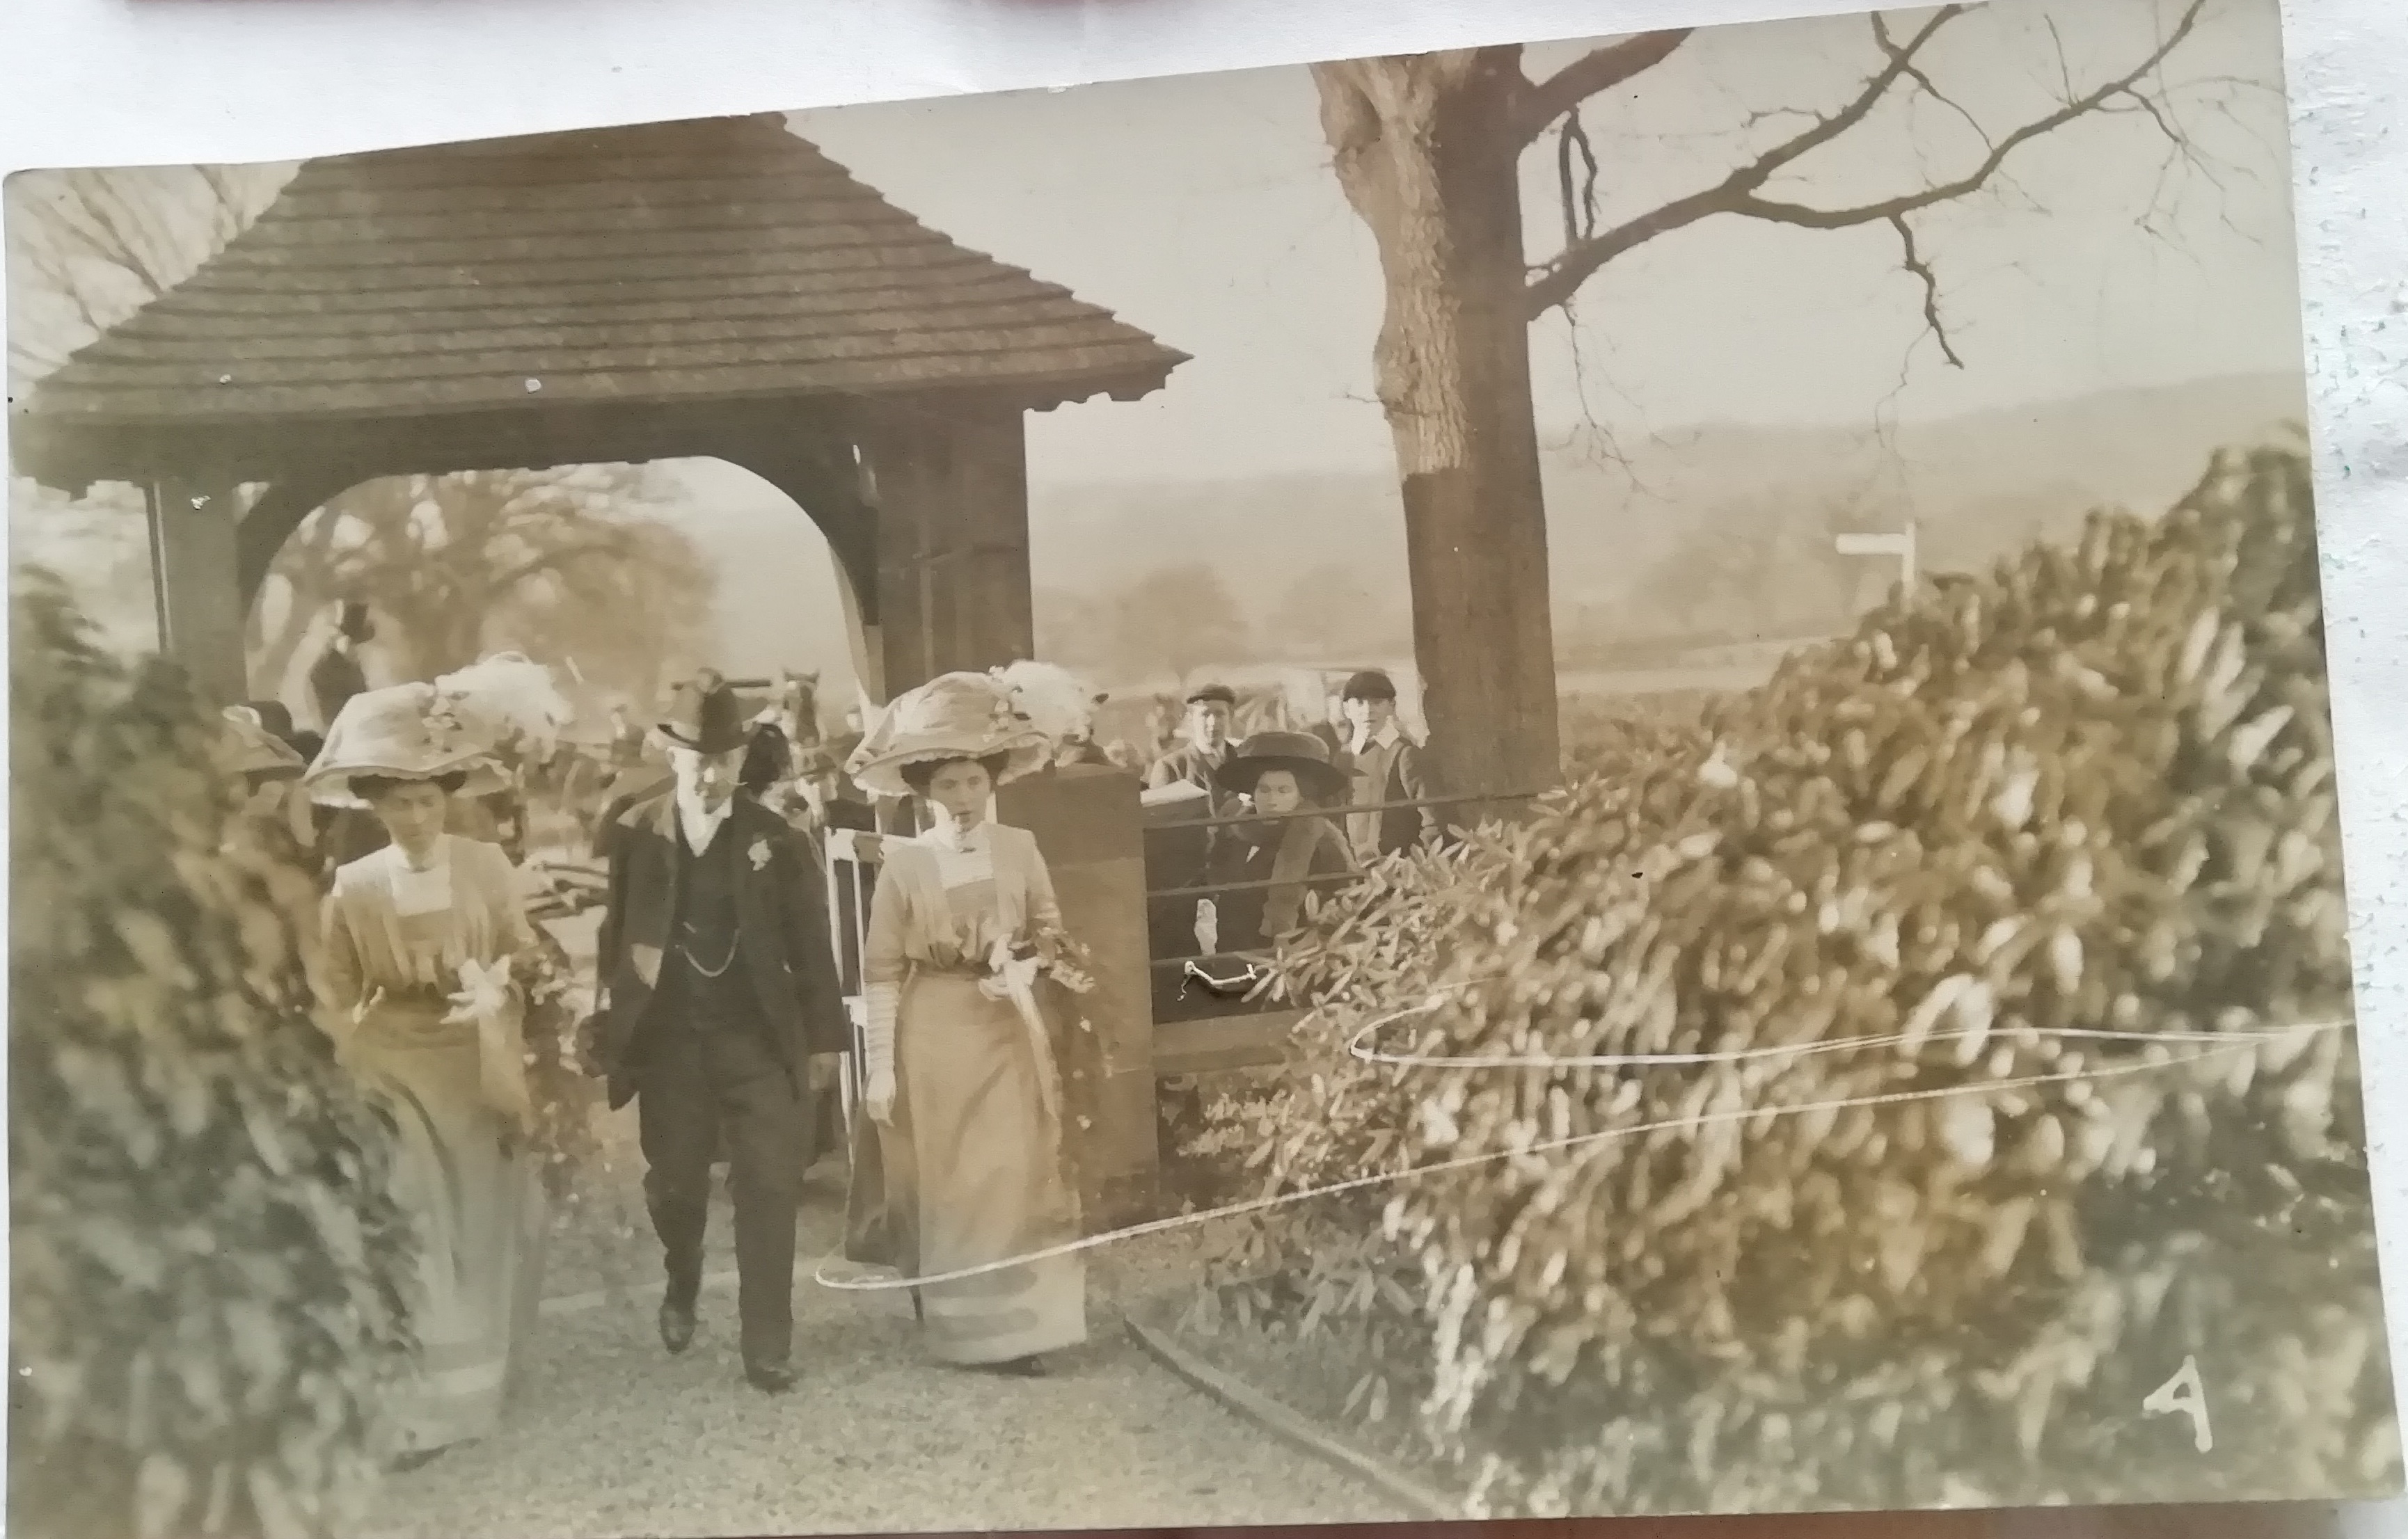 Black and white photograph of wedding party by lychgate. 2 brides with gentleman in-between. 1911.